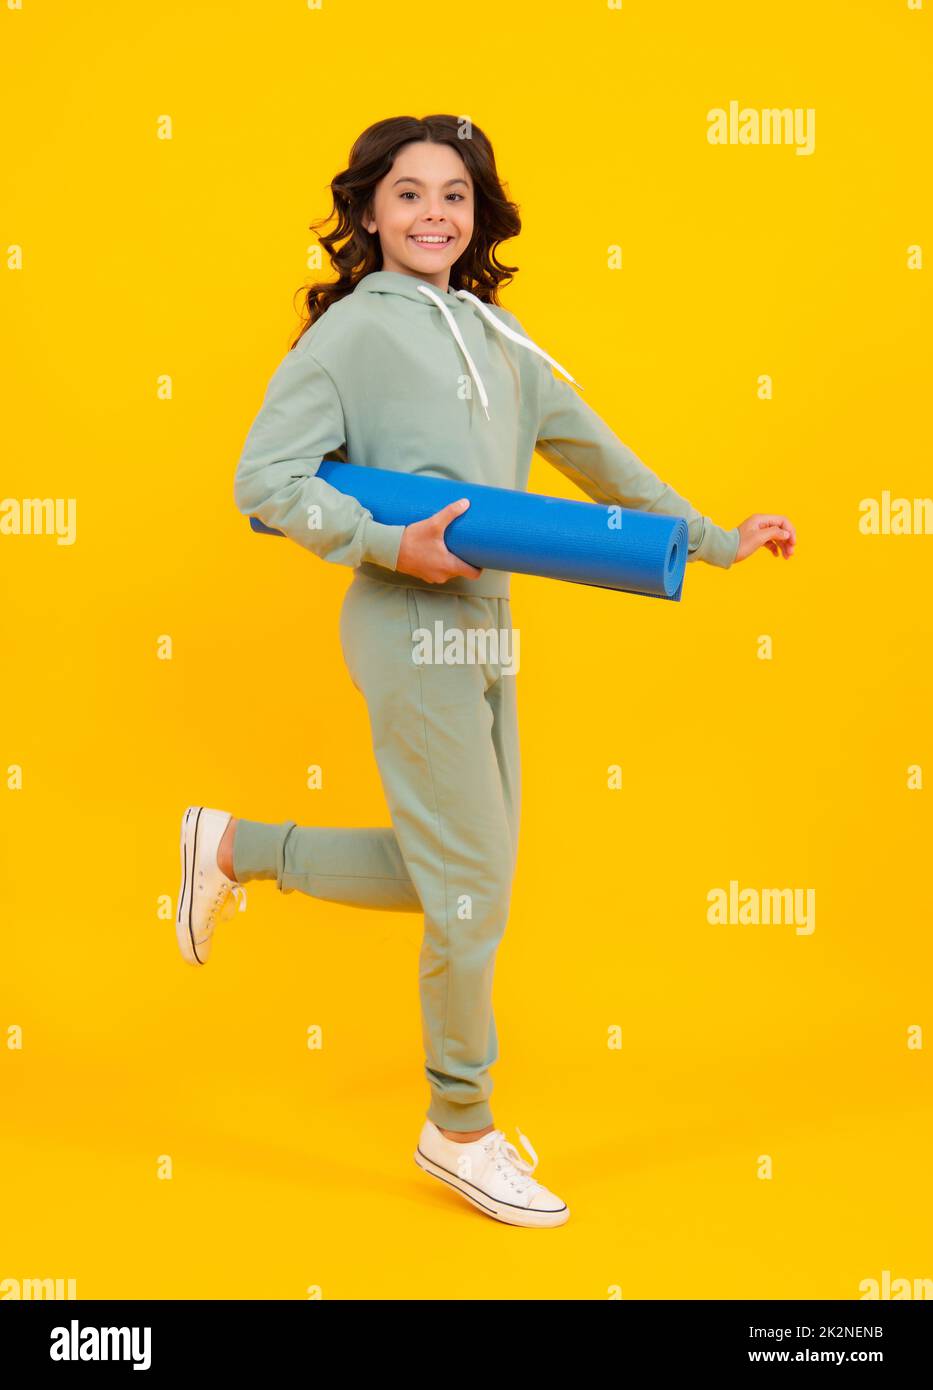 Teenage girl in track suit, fashion sports wear isolated on yellow background. Fitness sport child in sportswear sports clothing and shoes. Stock Photo